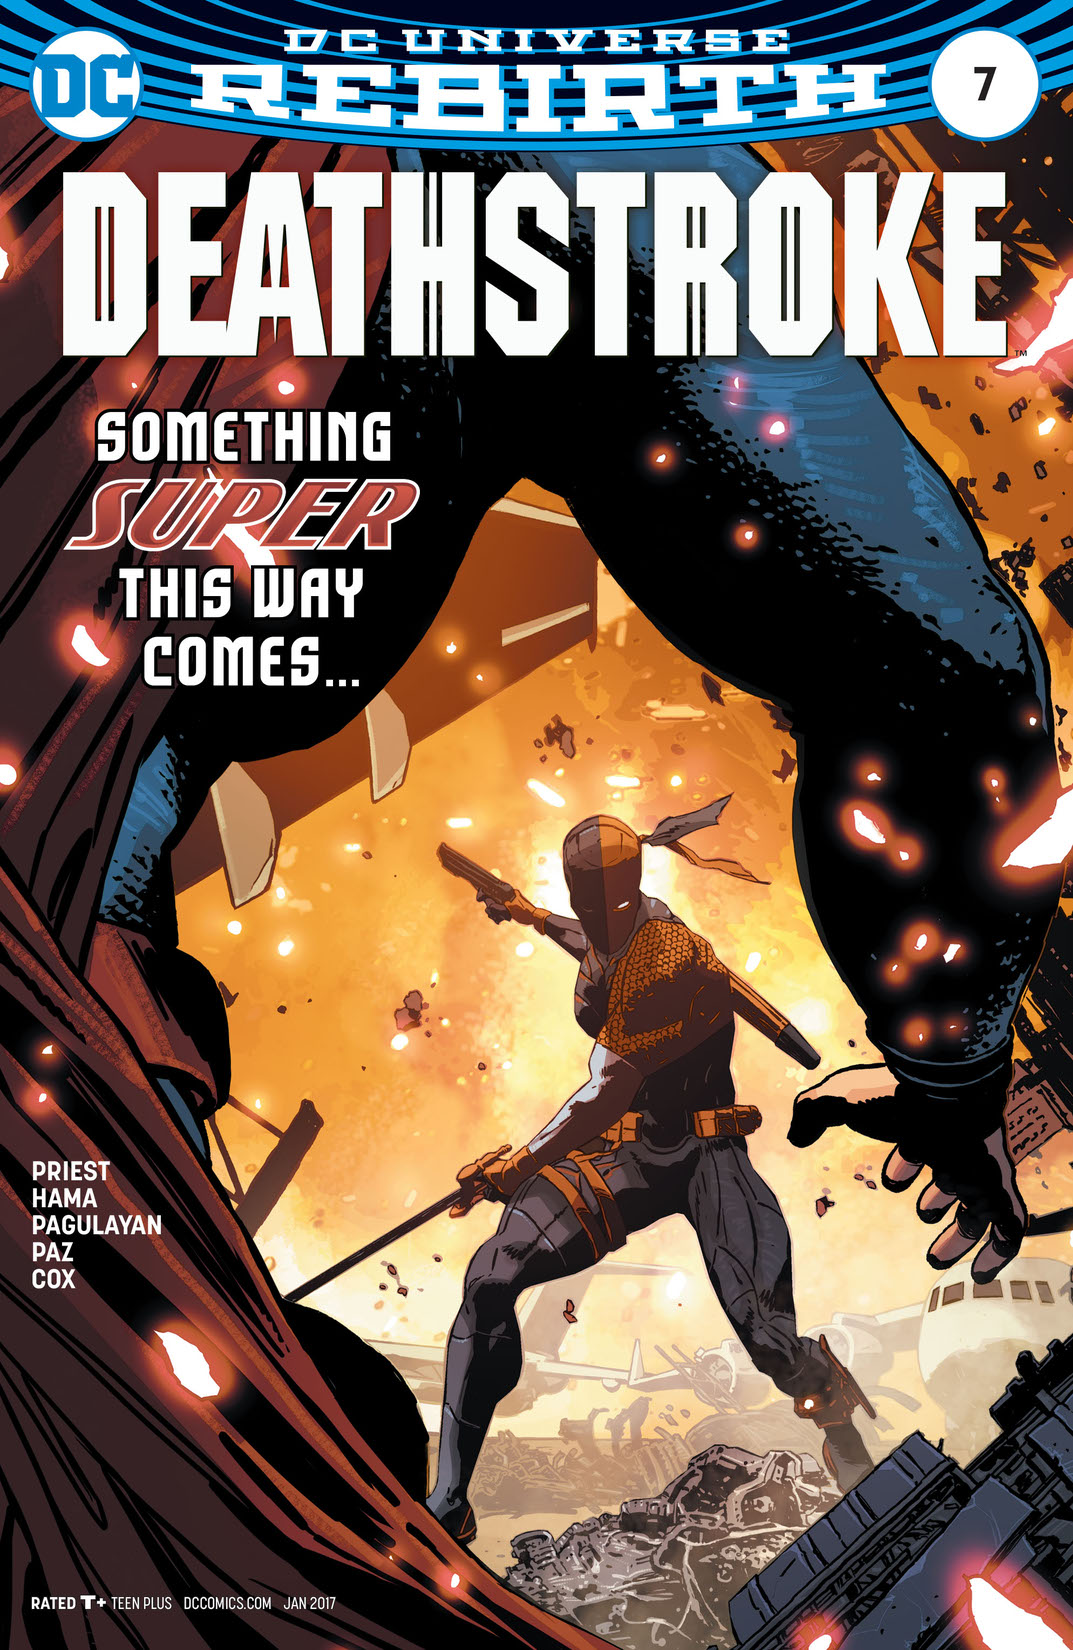 Deathstroke (2016-) #7 preview images